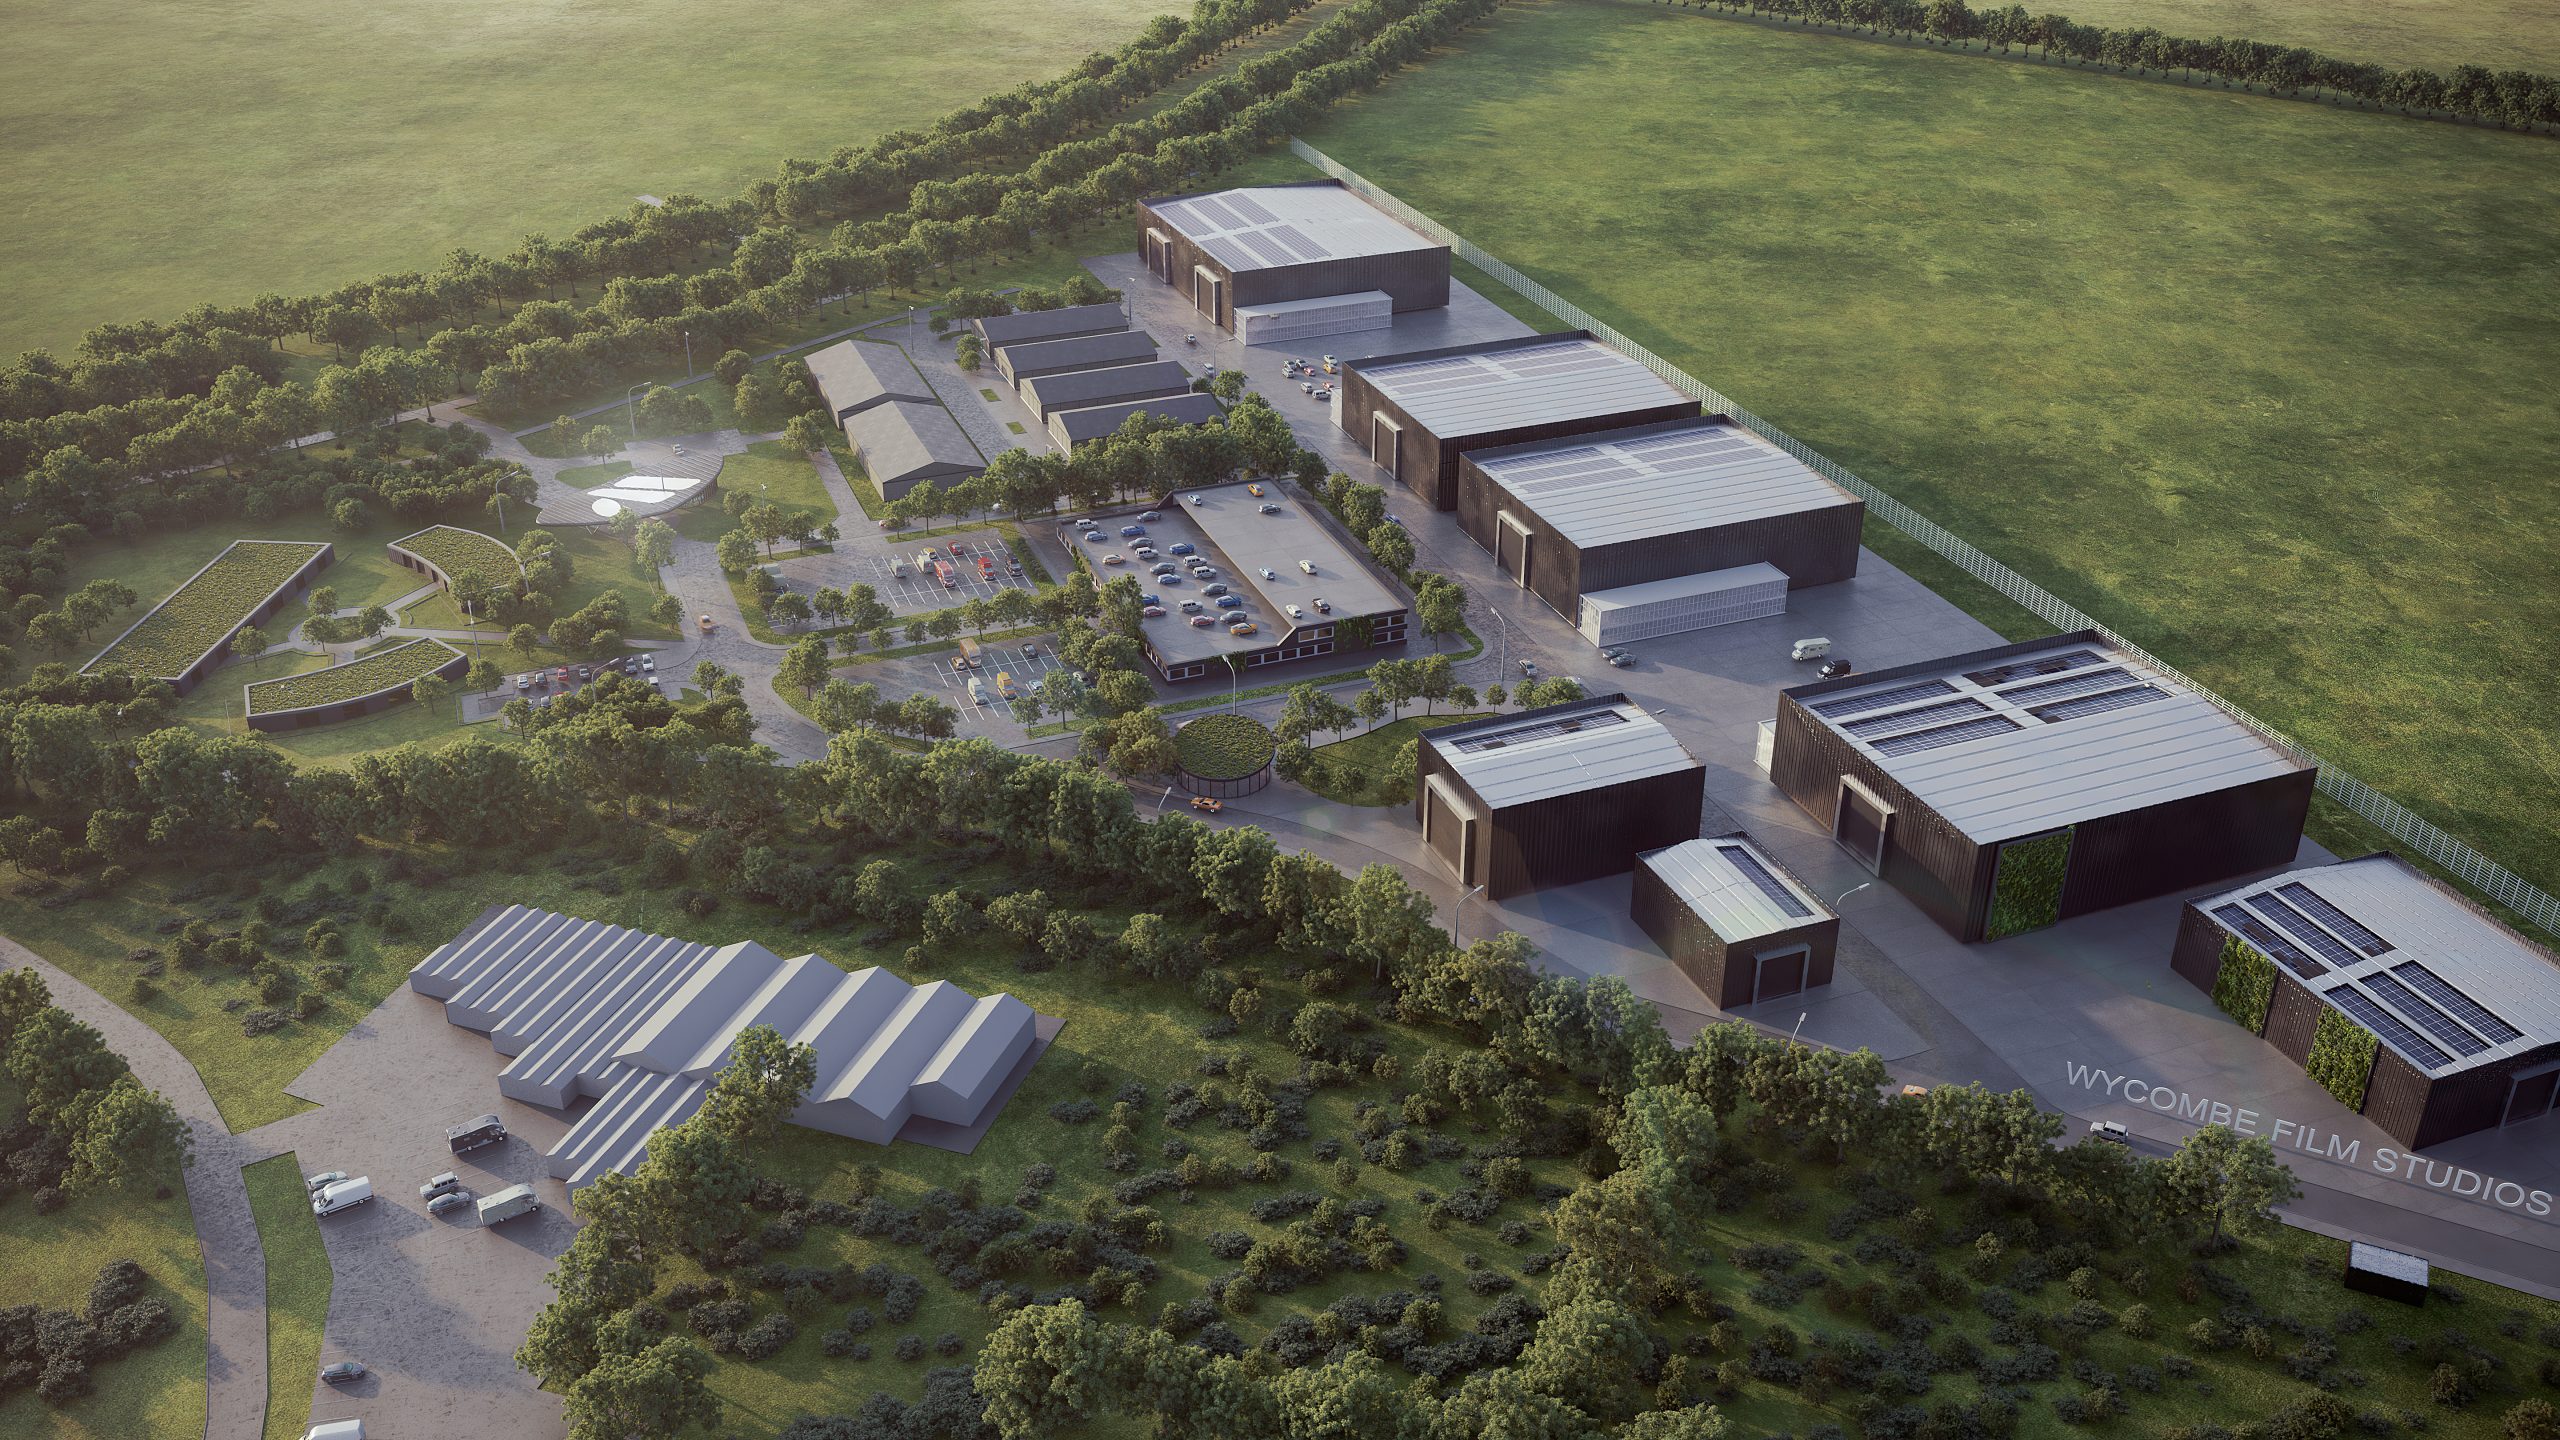 Exciting Plans for New Wycombe Film Studios Revealed